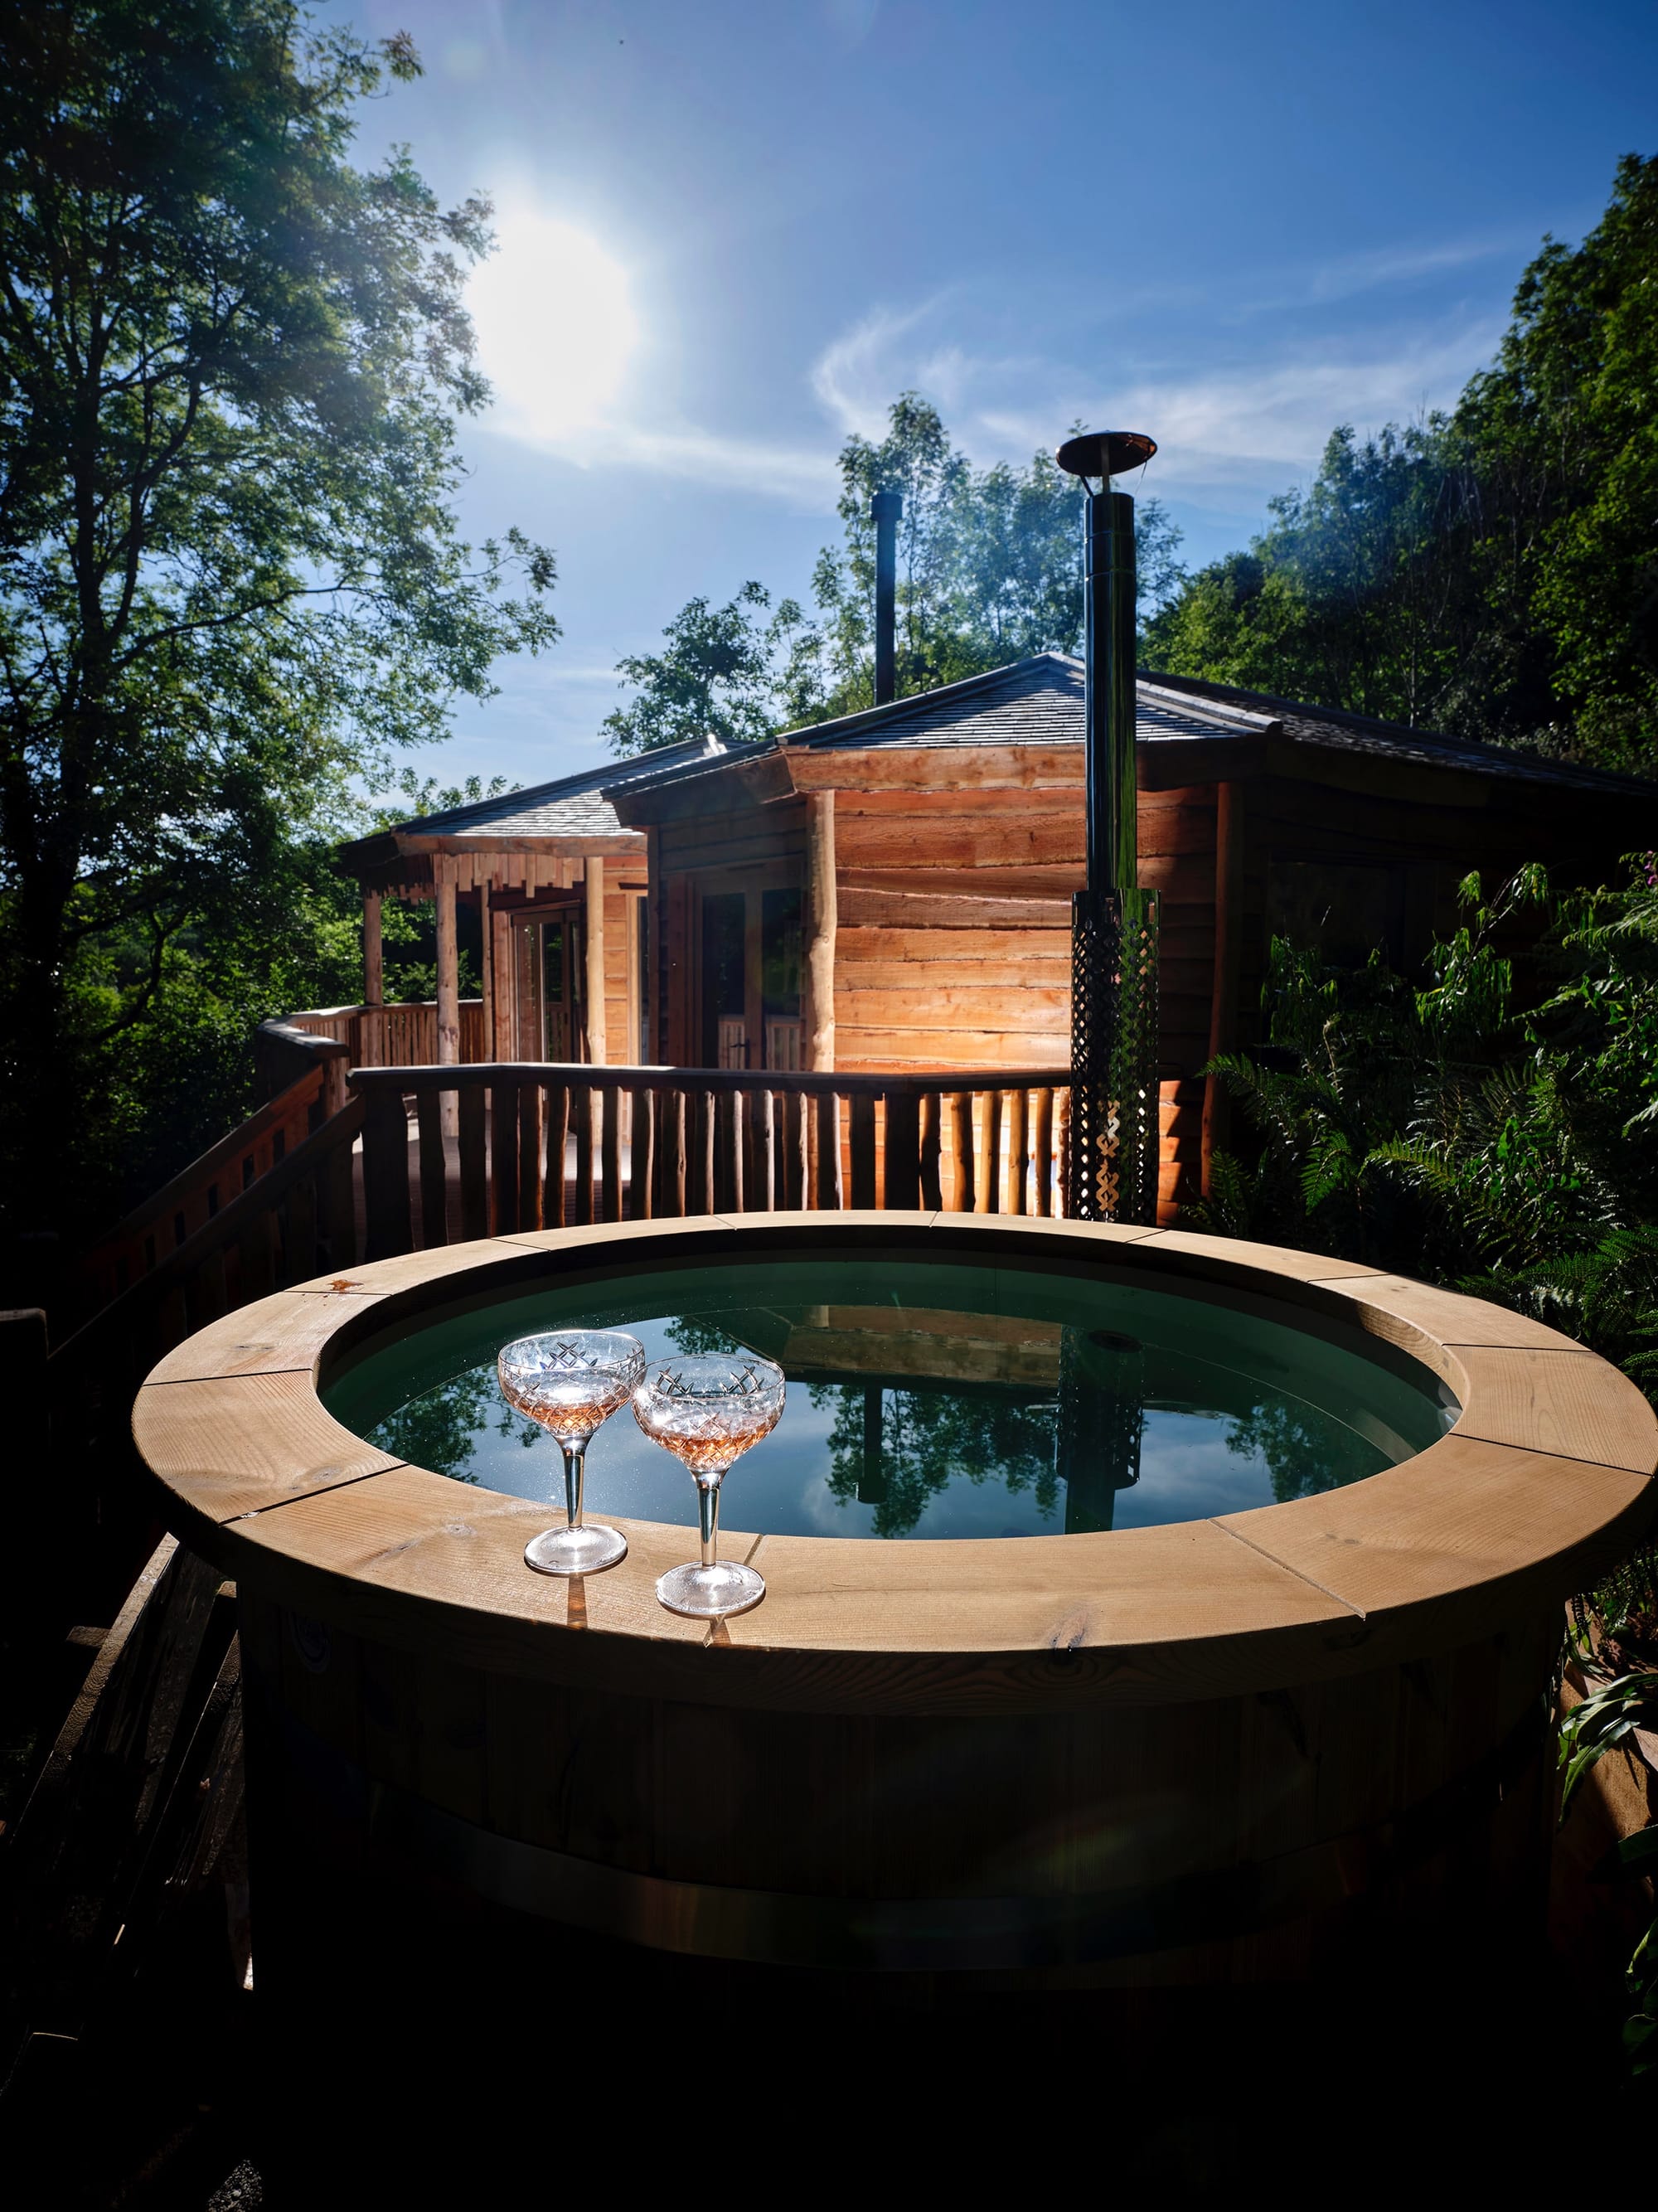 Top 10 Most Romantic Lodges With Hot Tubs In England